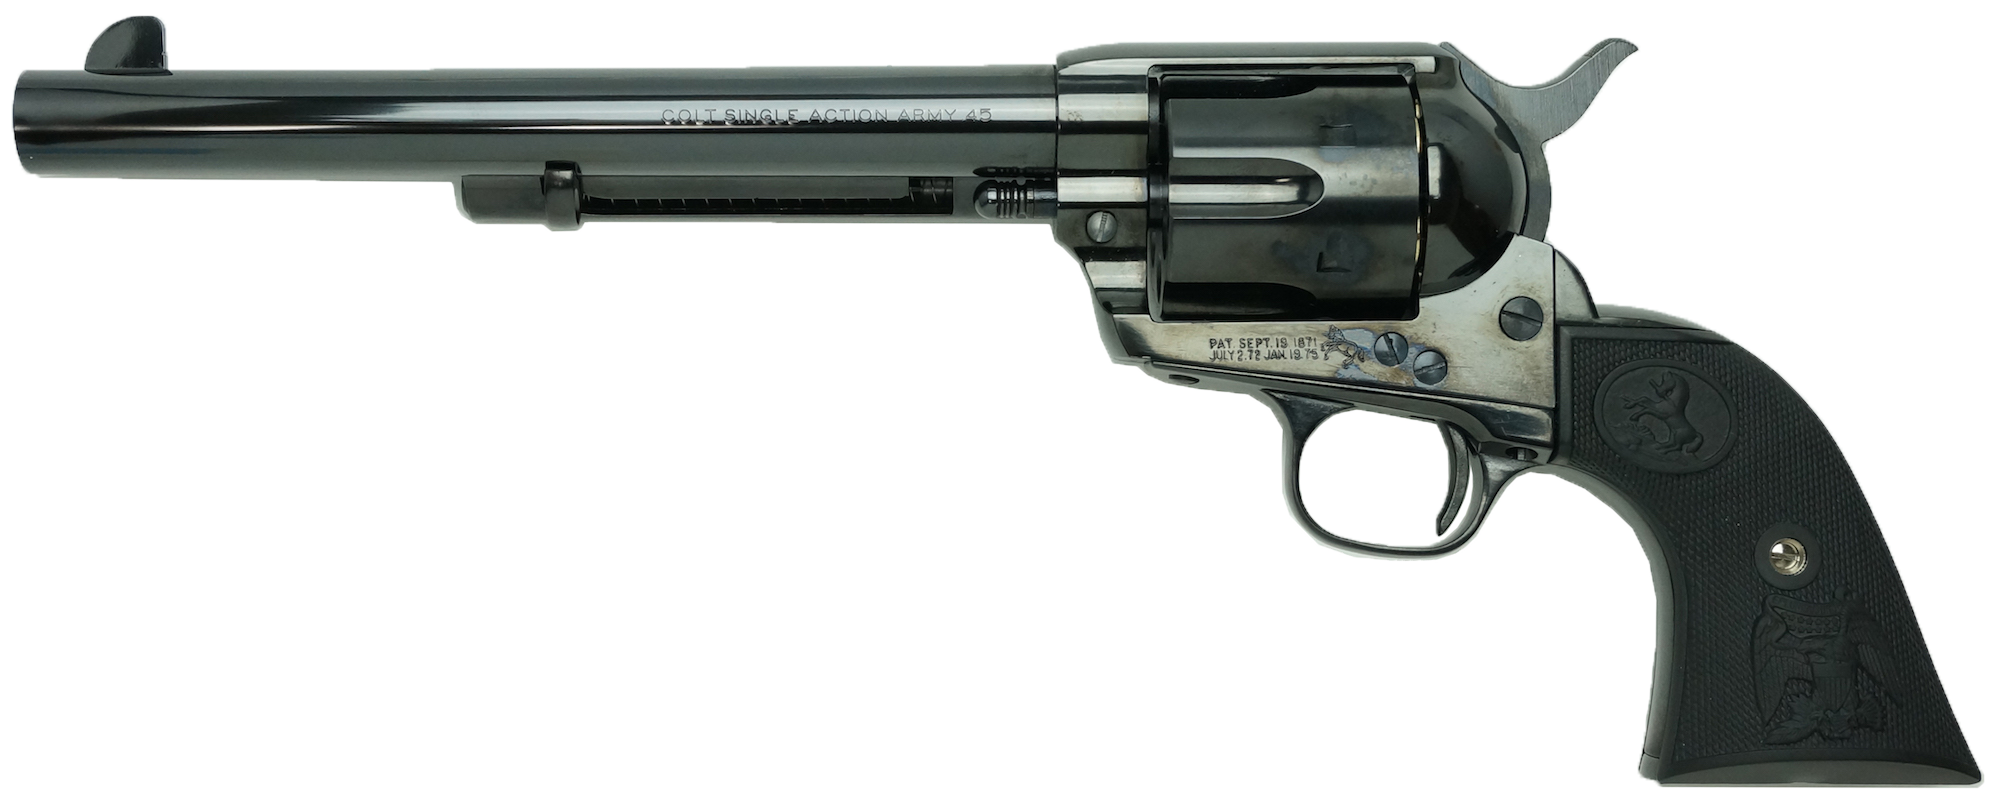 Colt Single Action Army .45 タカノウォーク www.sudouestprimeurs.fr